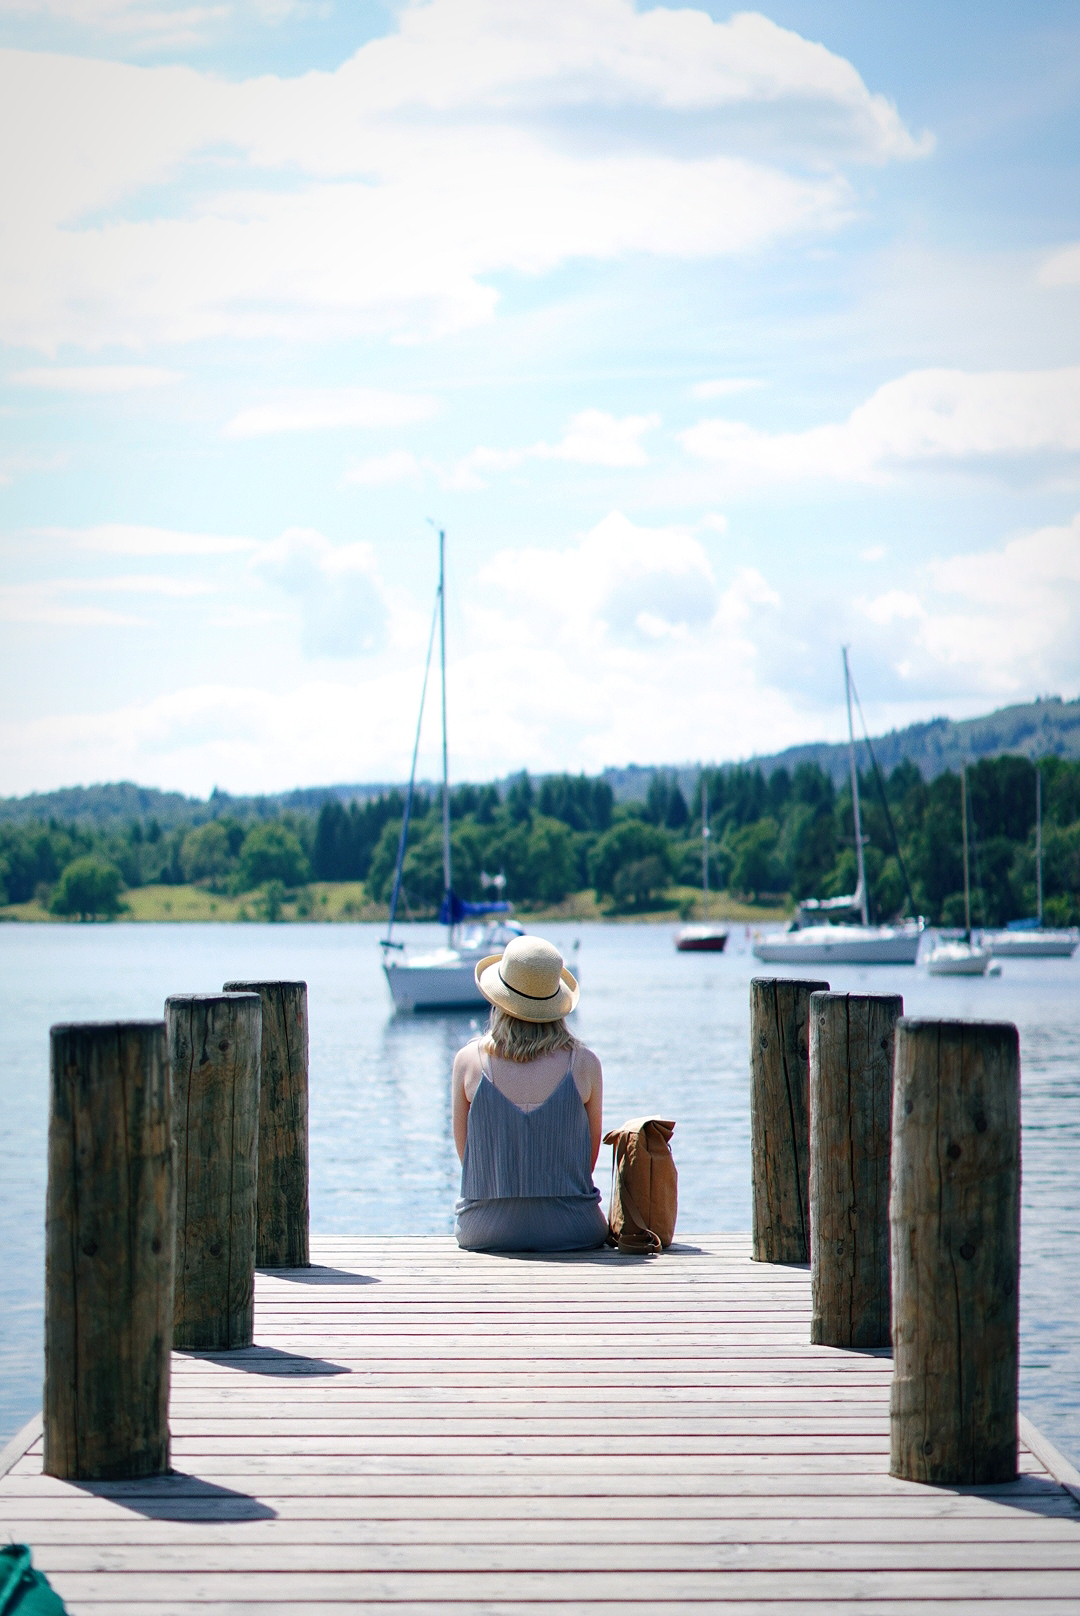 a wooden jetty overlooking a boating lake, a girl in a sun hat is sat at the end with her legs dangling over the edge